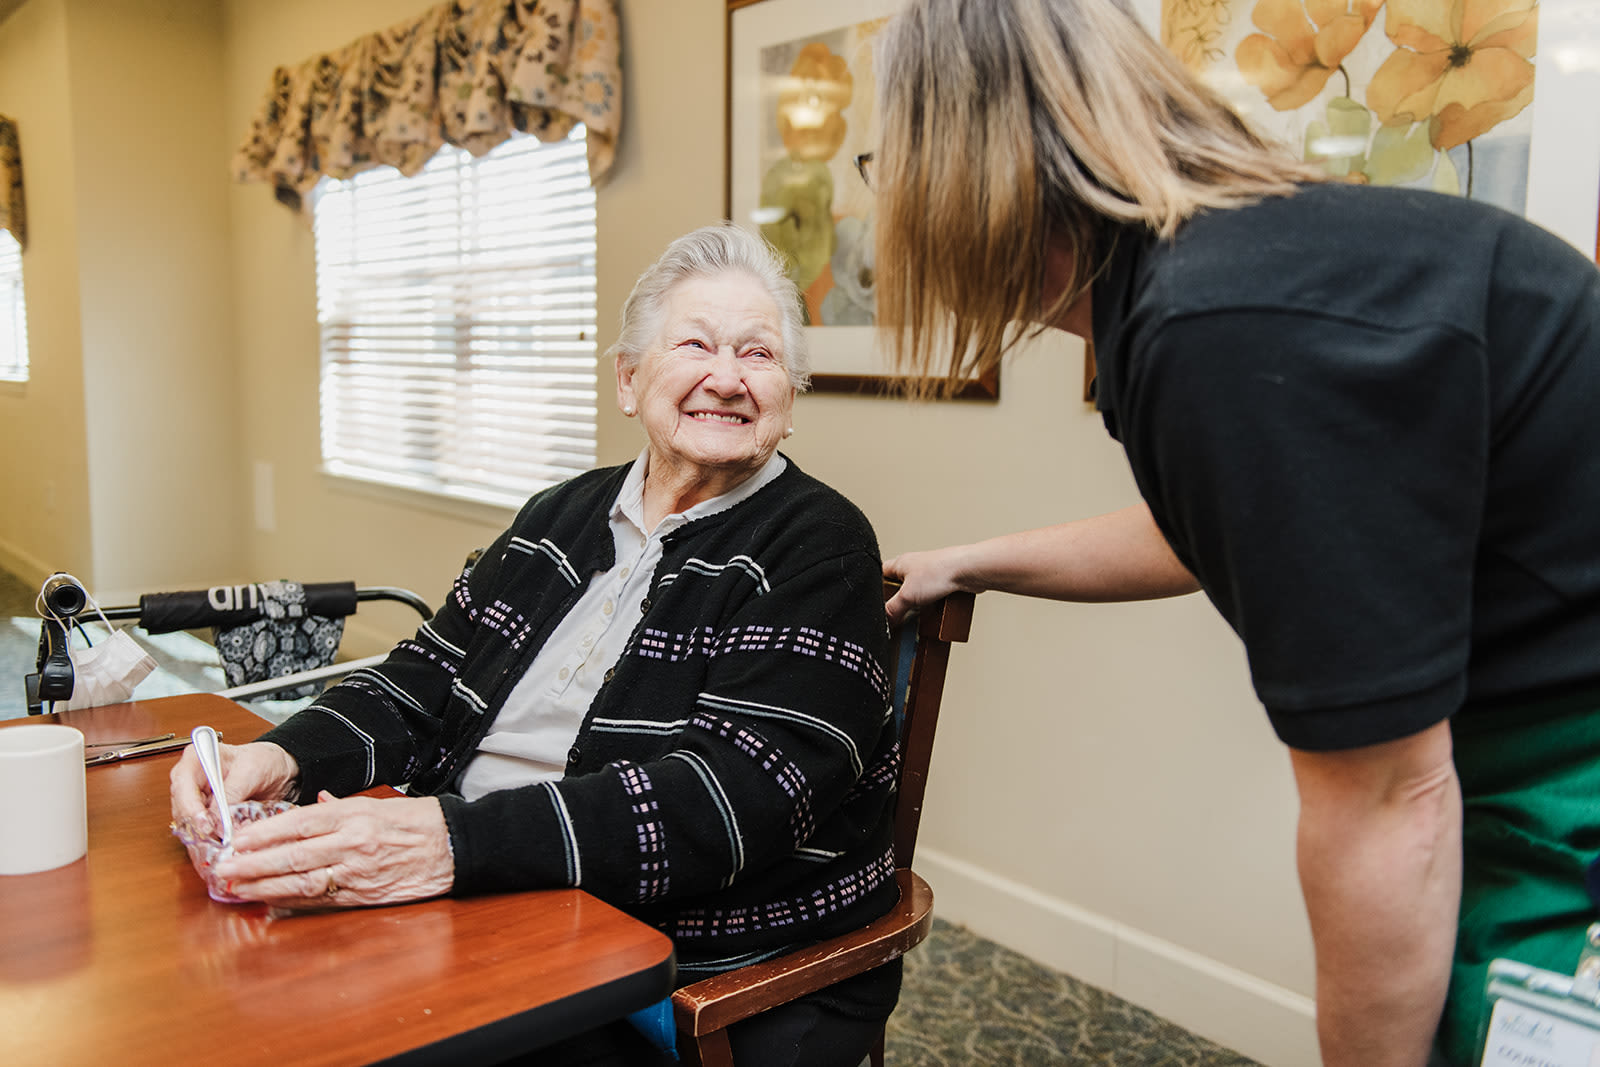 Caretaker talking to a resident at English Meadows Stephens City Campus in Stephens City, Virginia